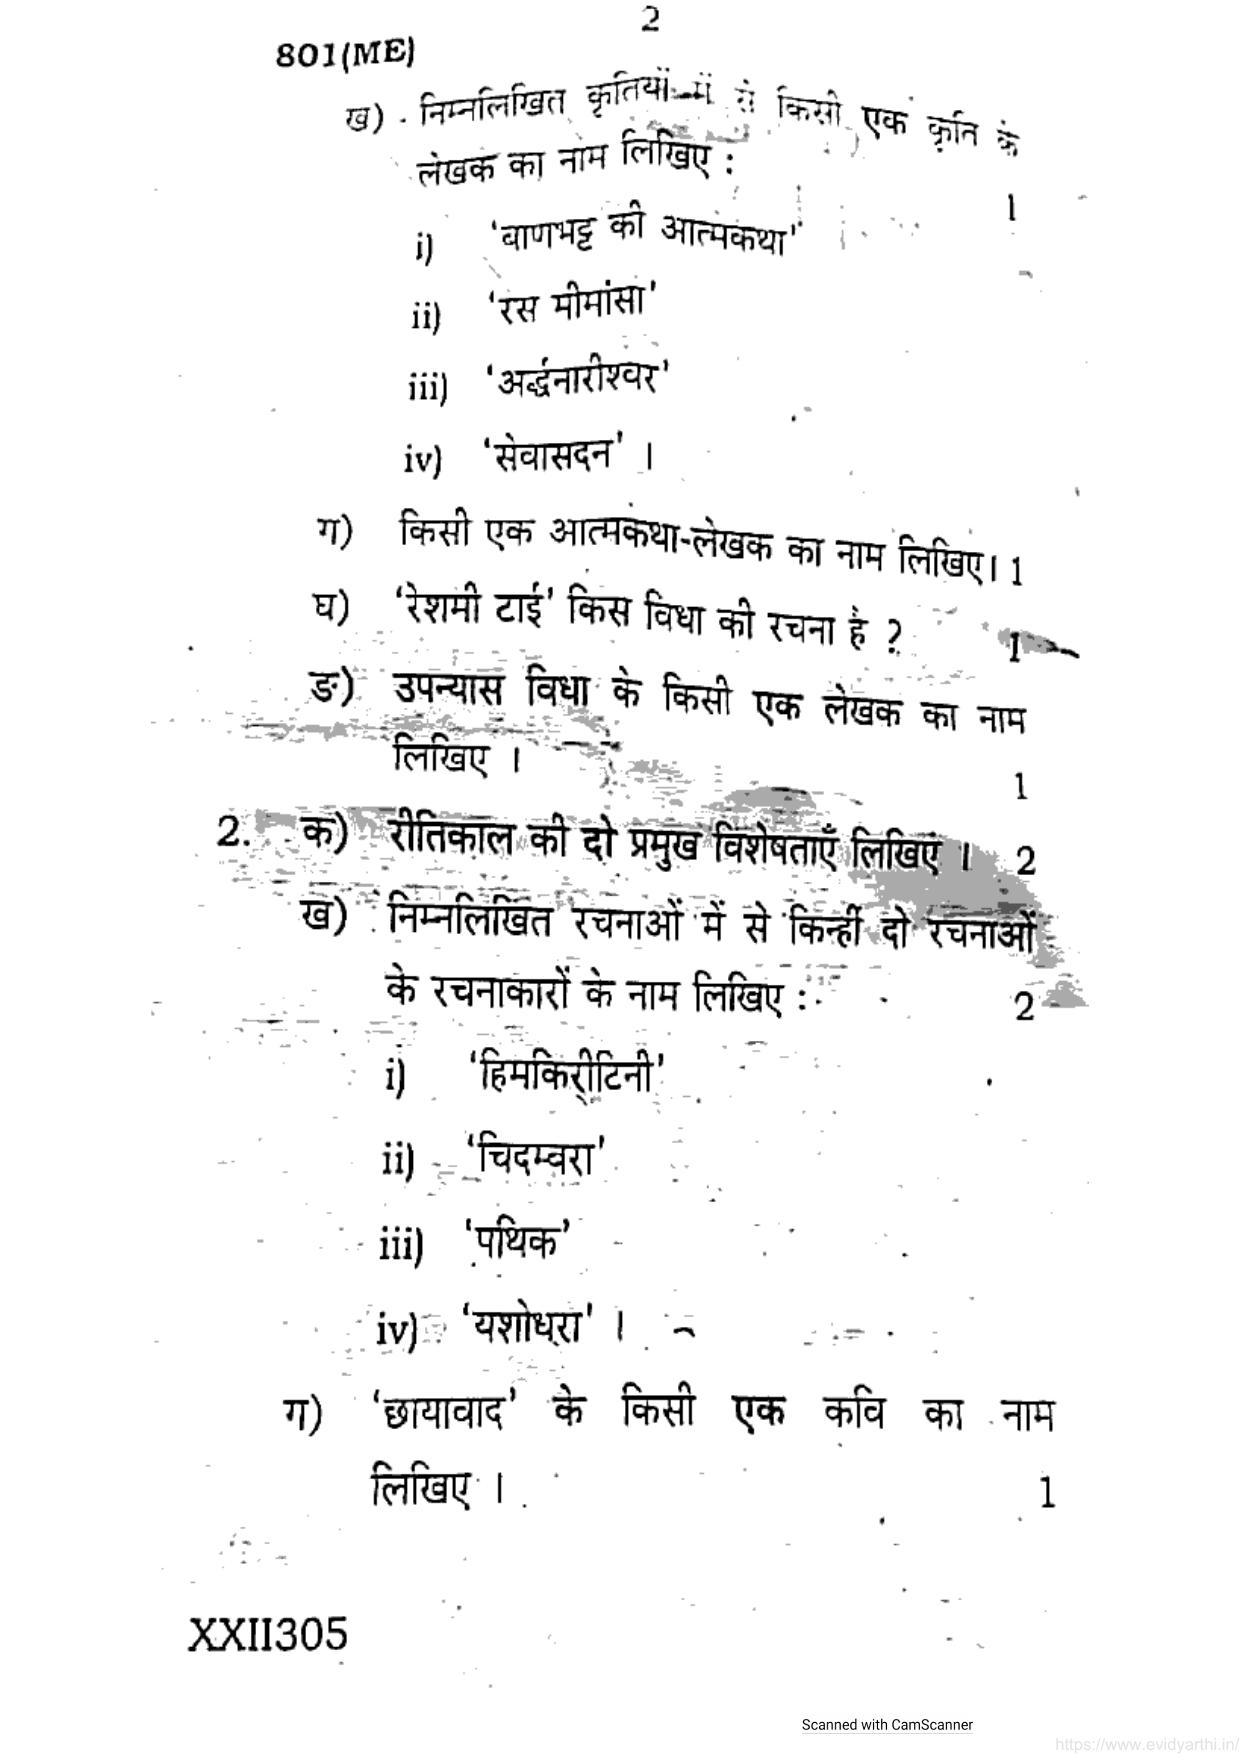 UP Board Previous Year Question Paper Class 10 Hindi (801 ME) – 2020 - Page 2